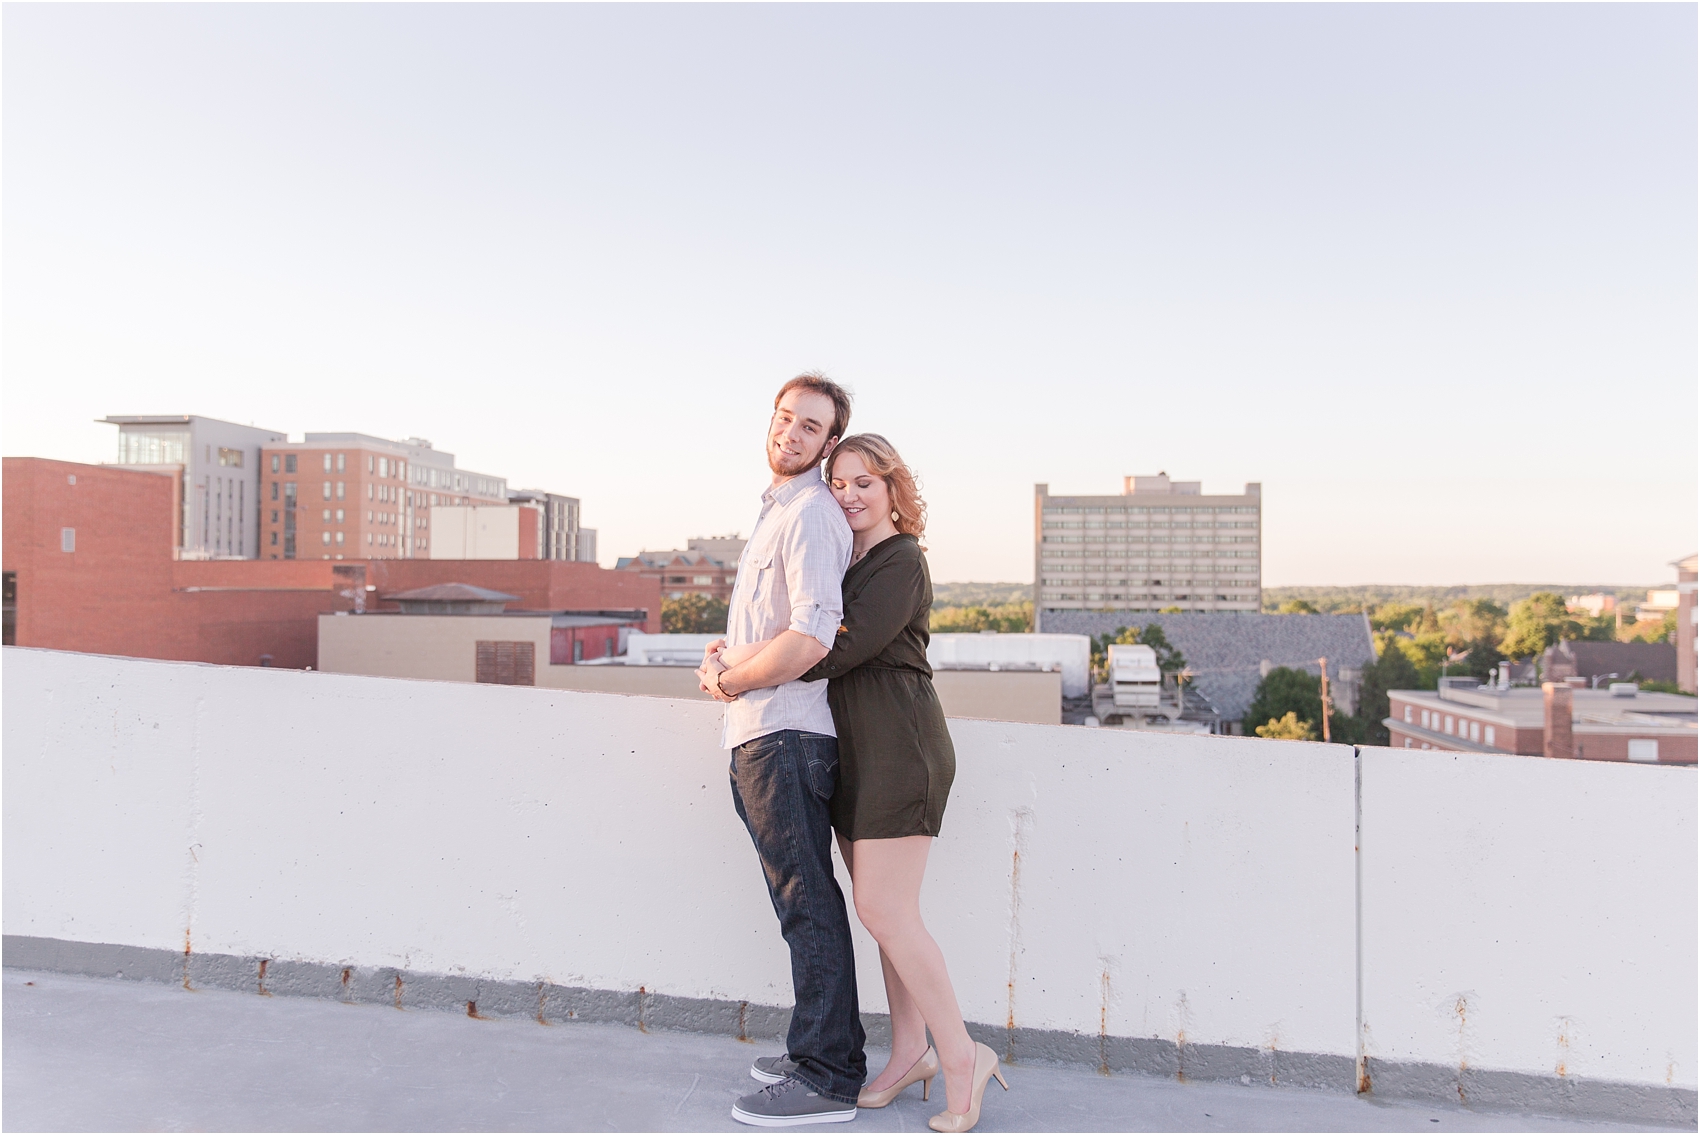 emotional-candid-romantic-engagement-photos-in-detroit-chicago-northern-michigan-by-courtney-carolyn-photography_0057.jpg